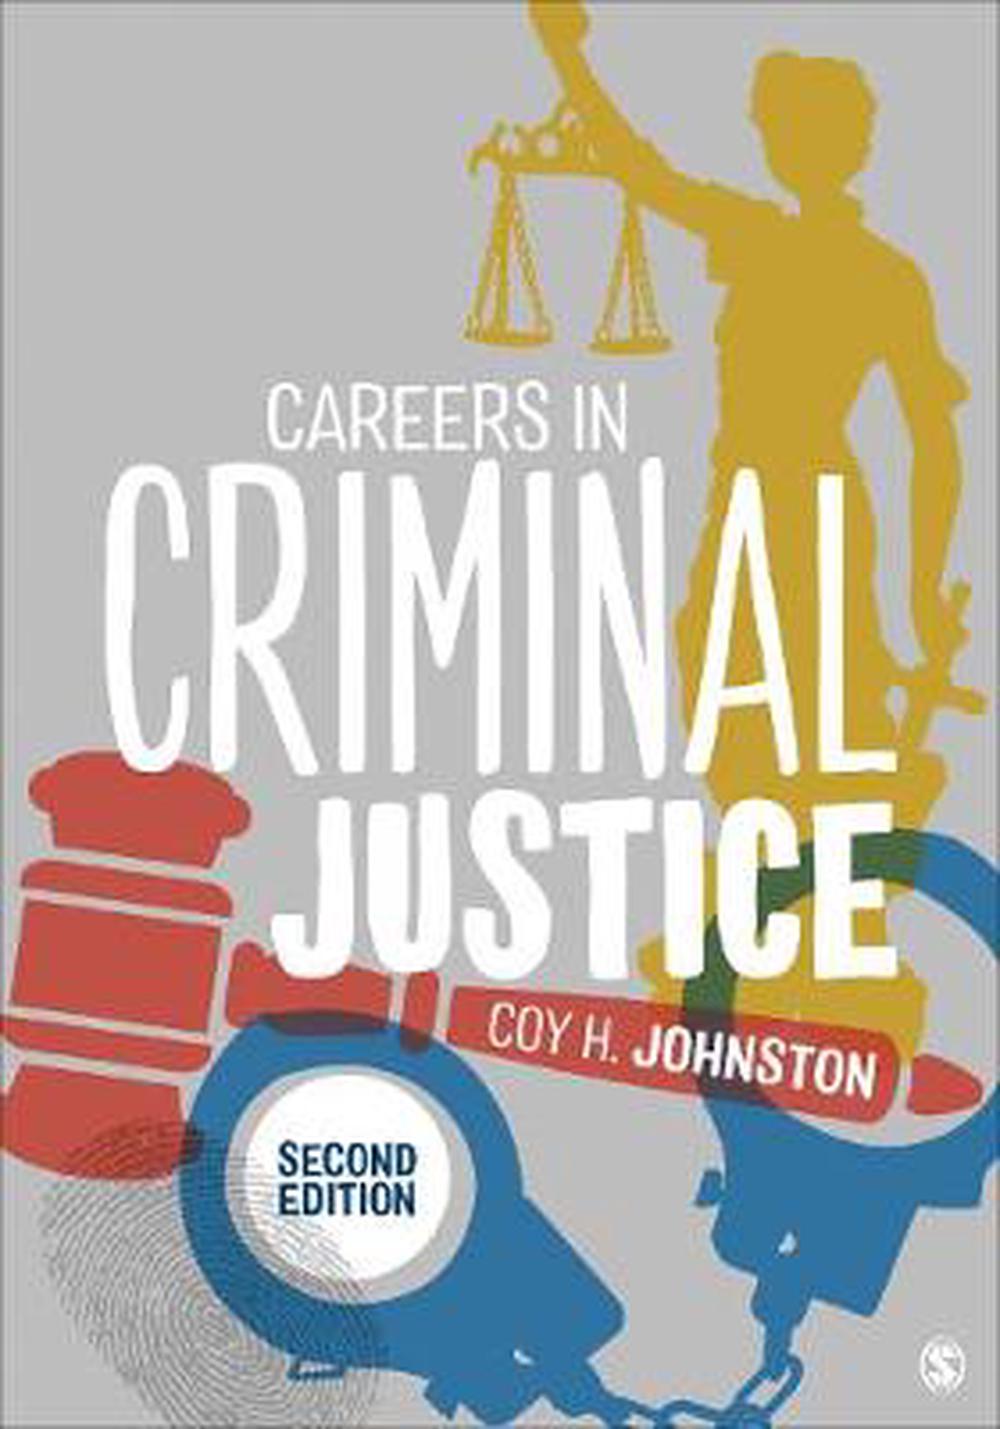 careers-in-criminal-justice-by-coy-h-johnston-paperback-book-free-shipping-9781506363950-ebay